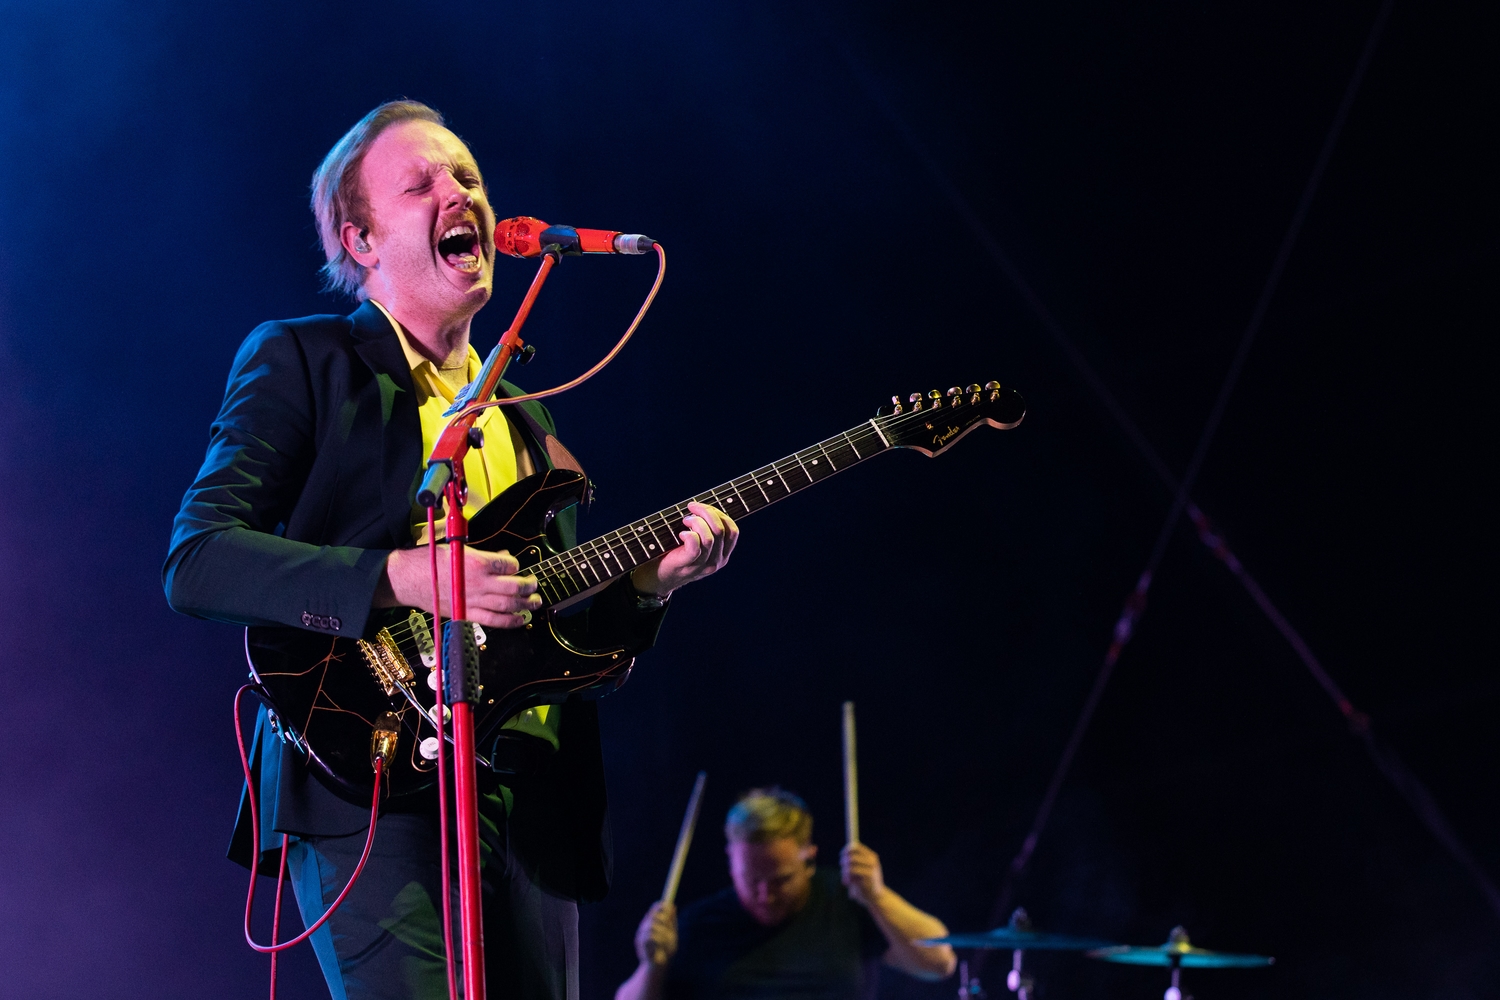 Two Door Cinema Club will play Margate's Summer Series this year